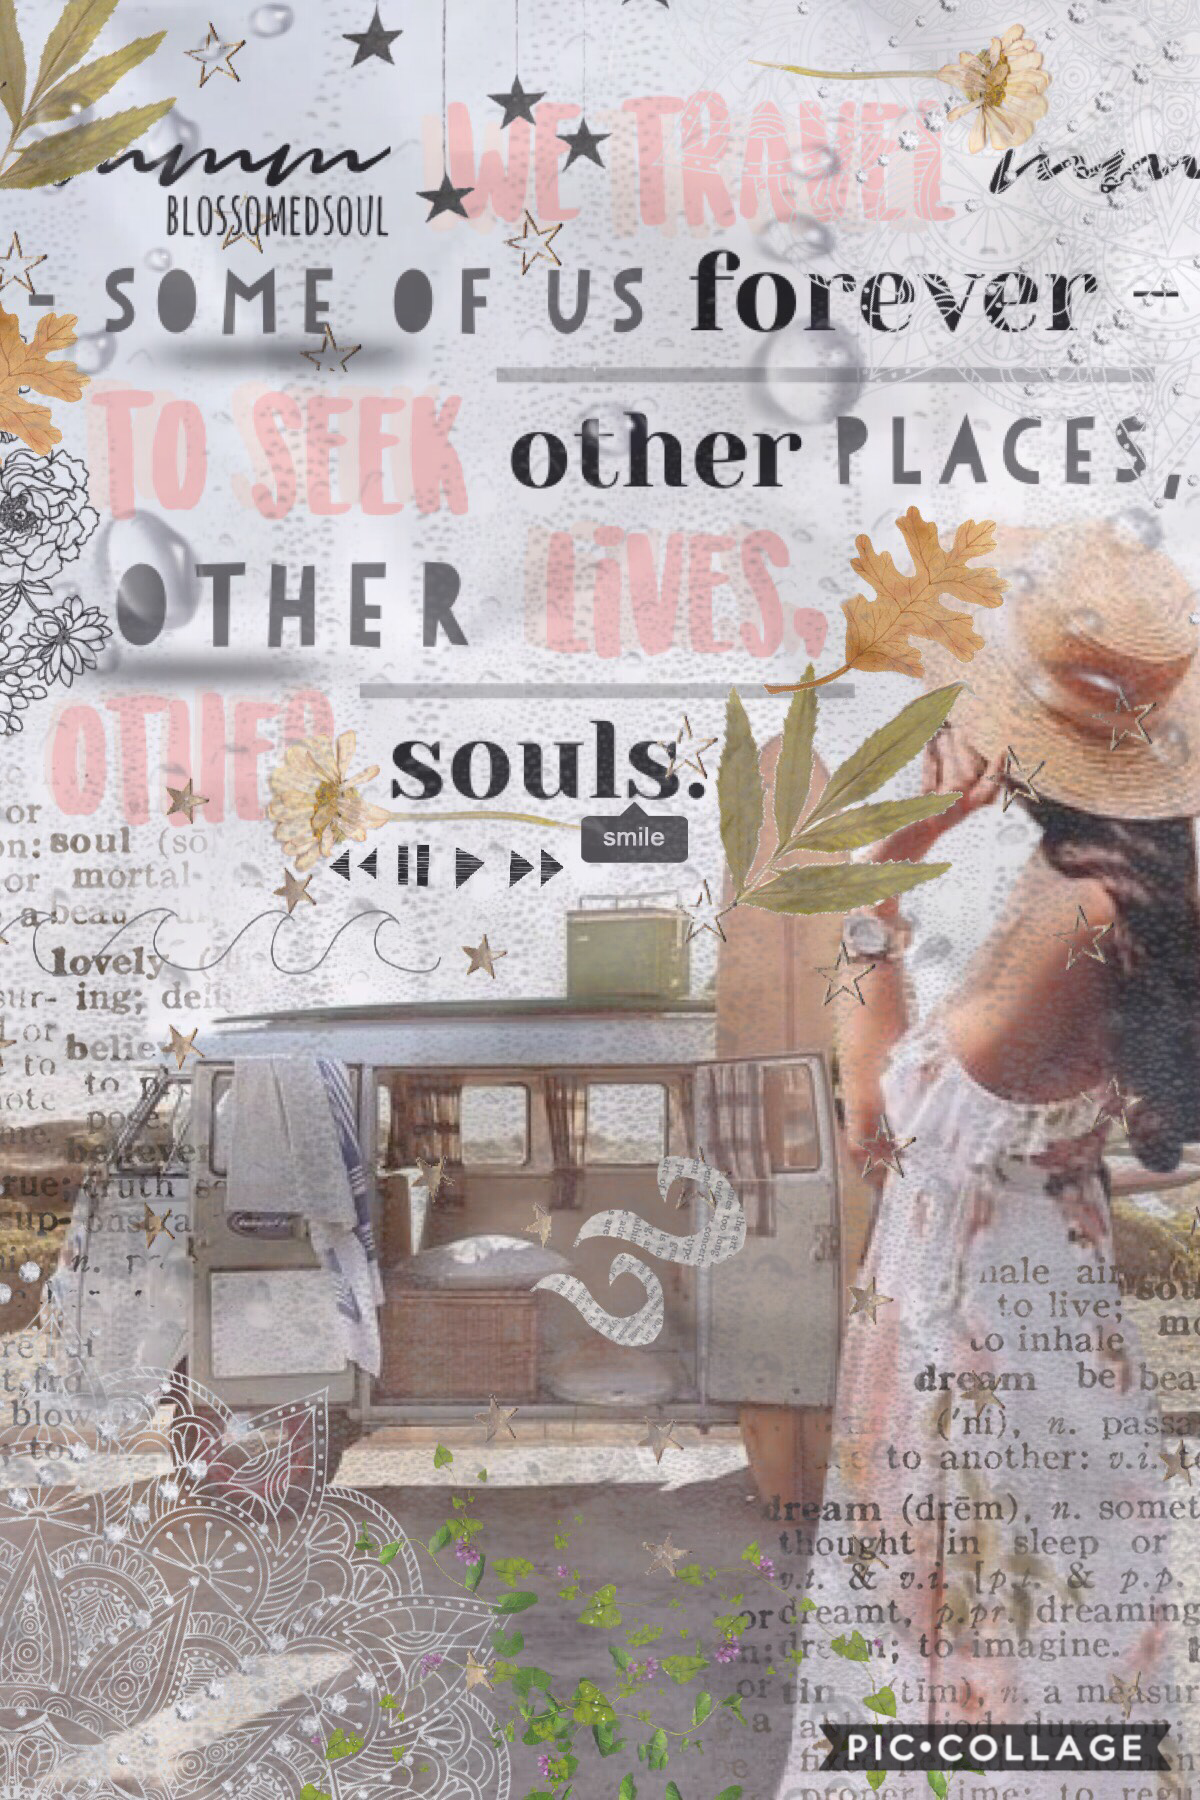 t a p

sorry for this realllyyyyy messy collage, i loved the bg though so i had to use it 😂 qotd: would you rather travel by airplane or camper van? aotd: camper van 💕